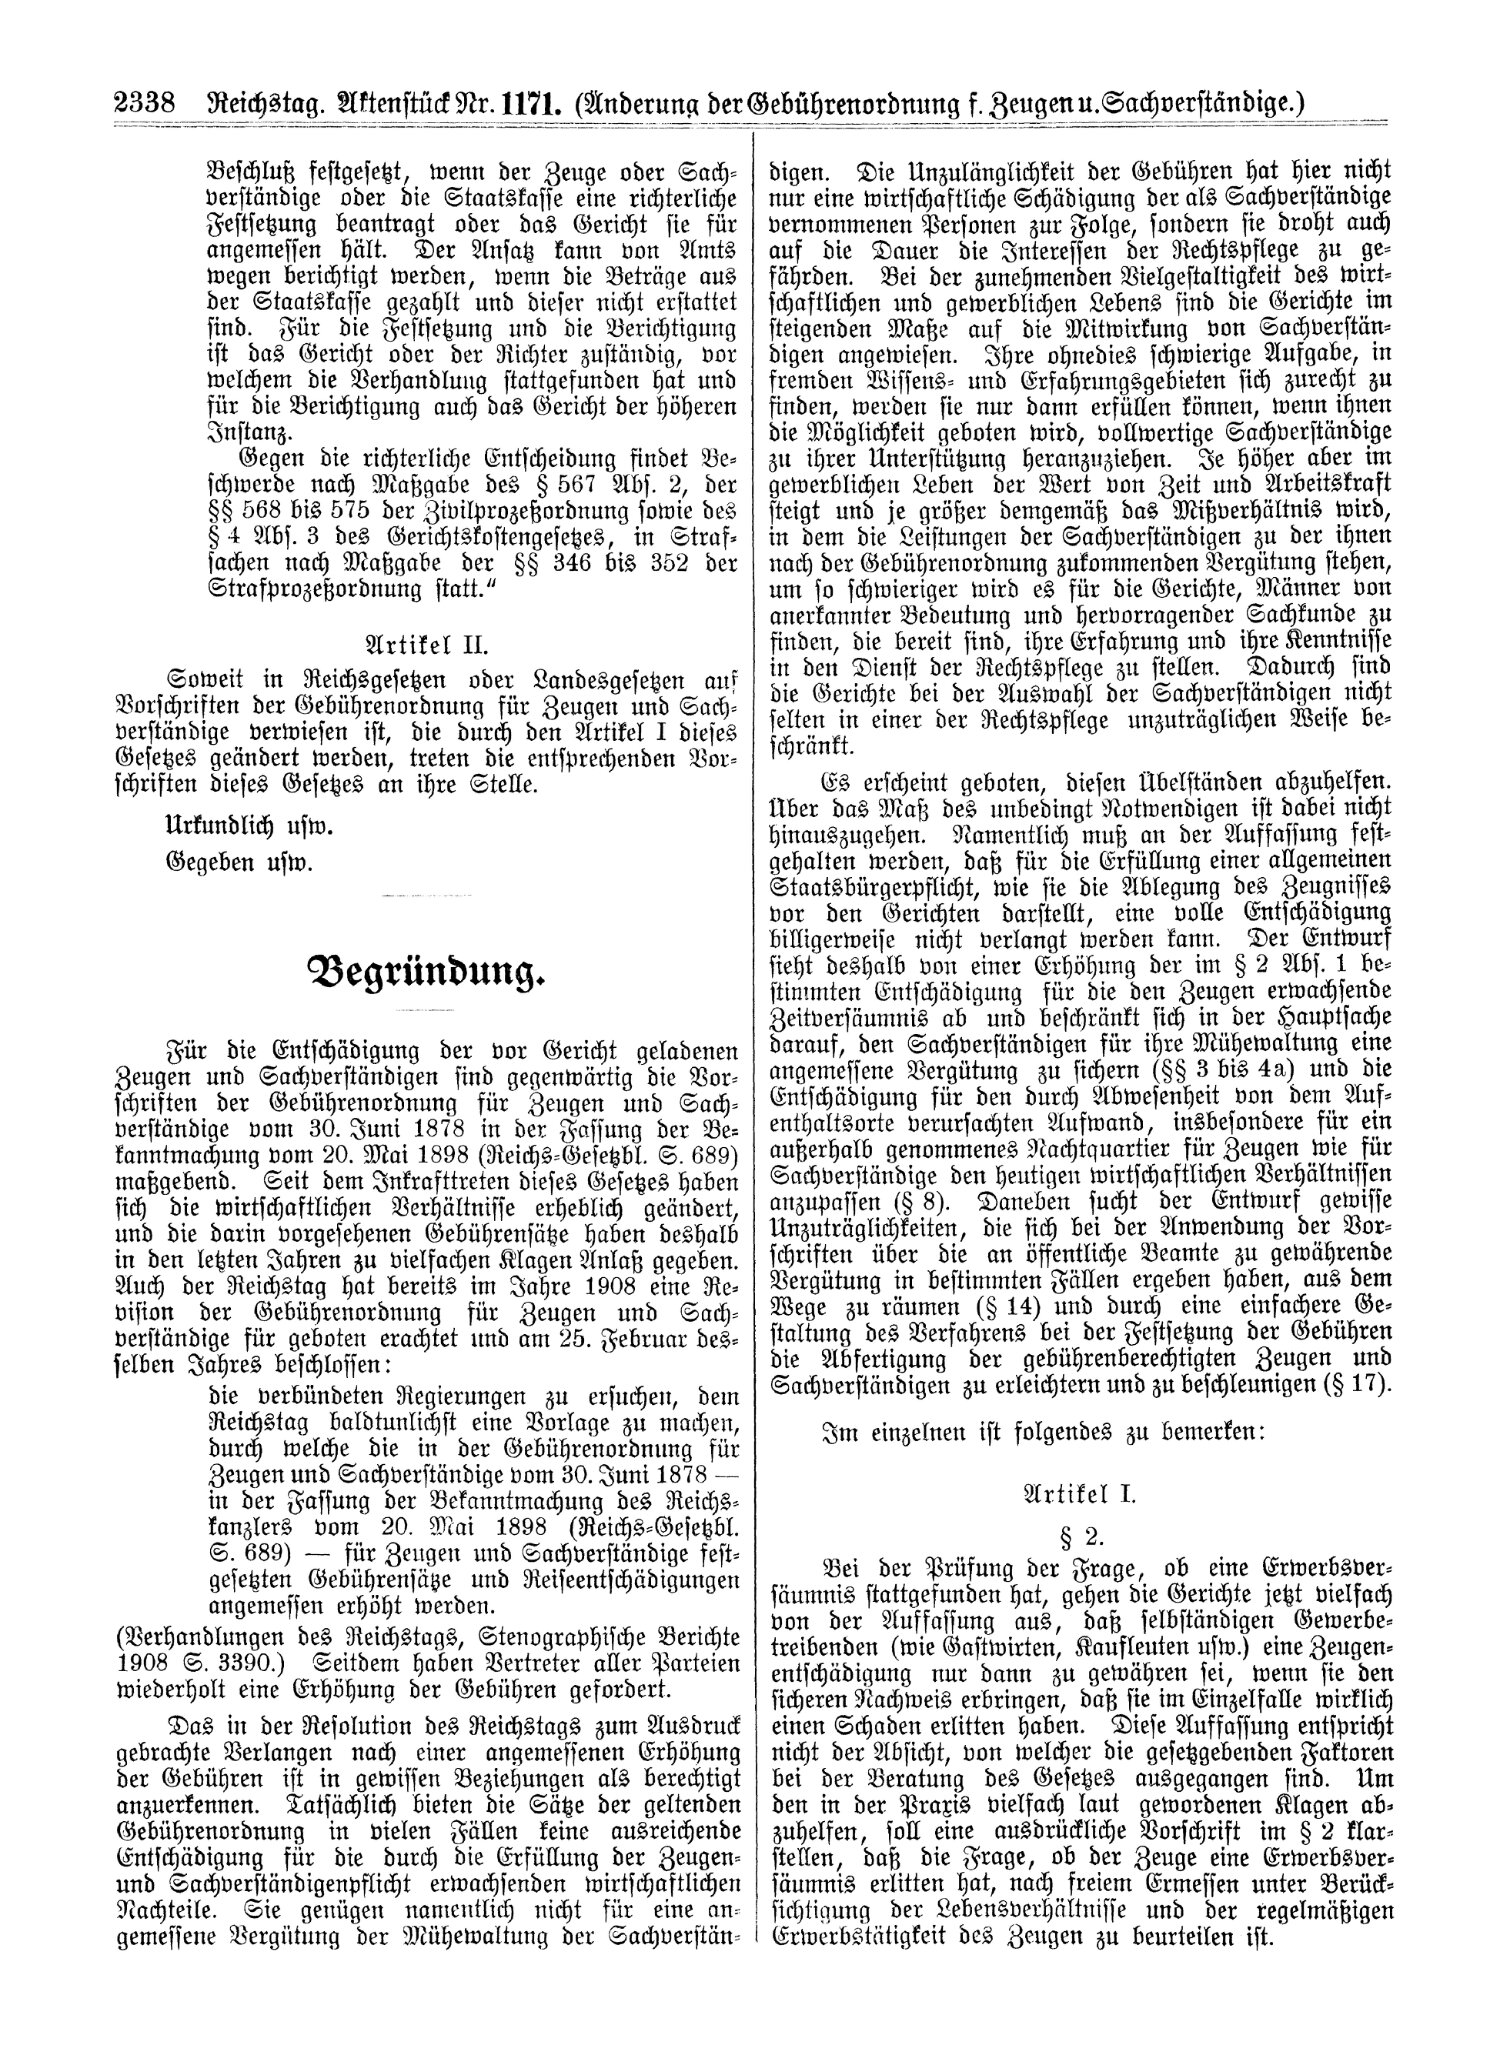 Scan of page 2338